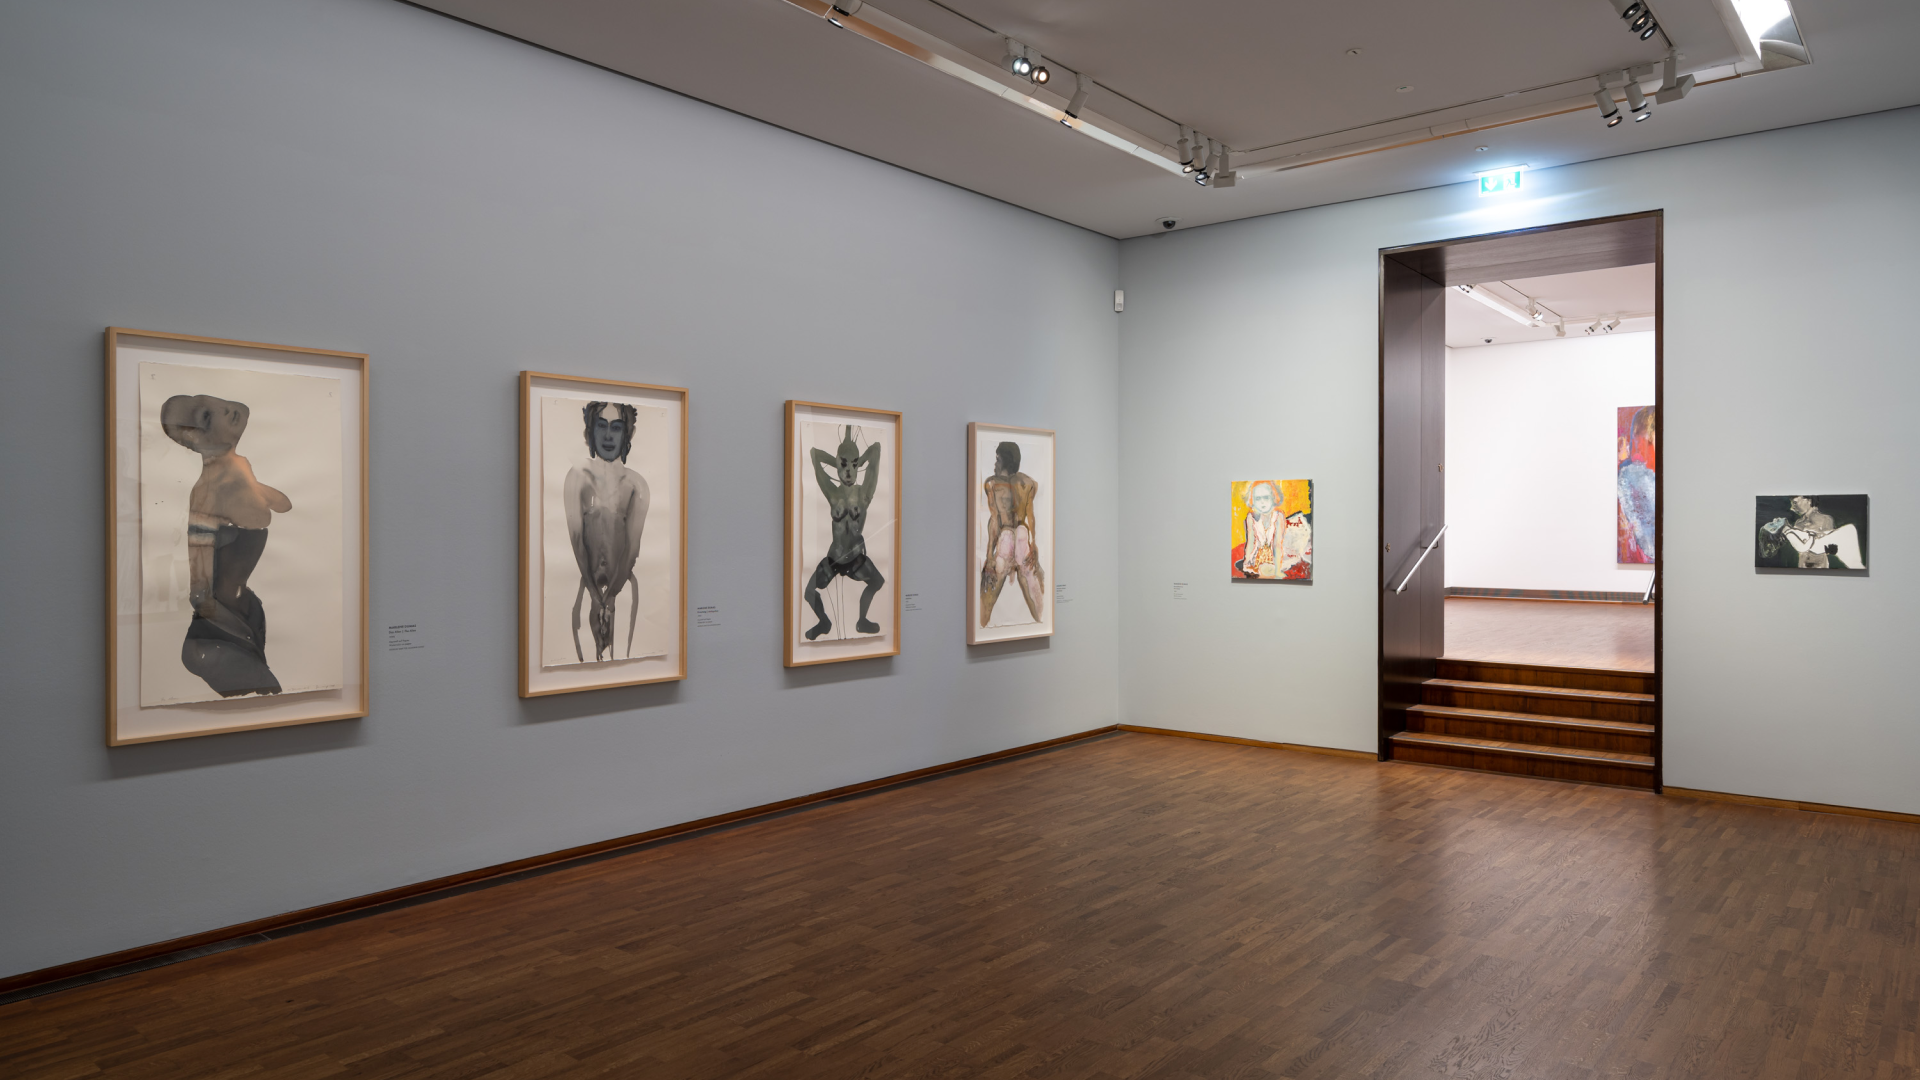 Installation view of the exhibition, Edvard Munch. In Dialogue, at the ALBERTINA Museum in Vienna, dated 2022.